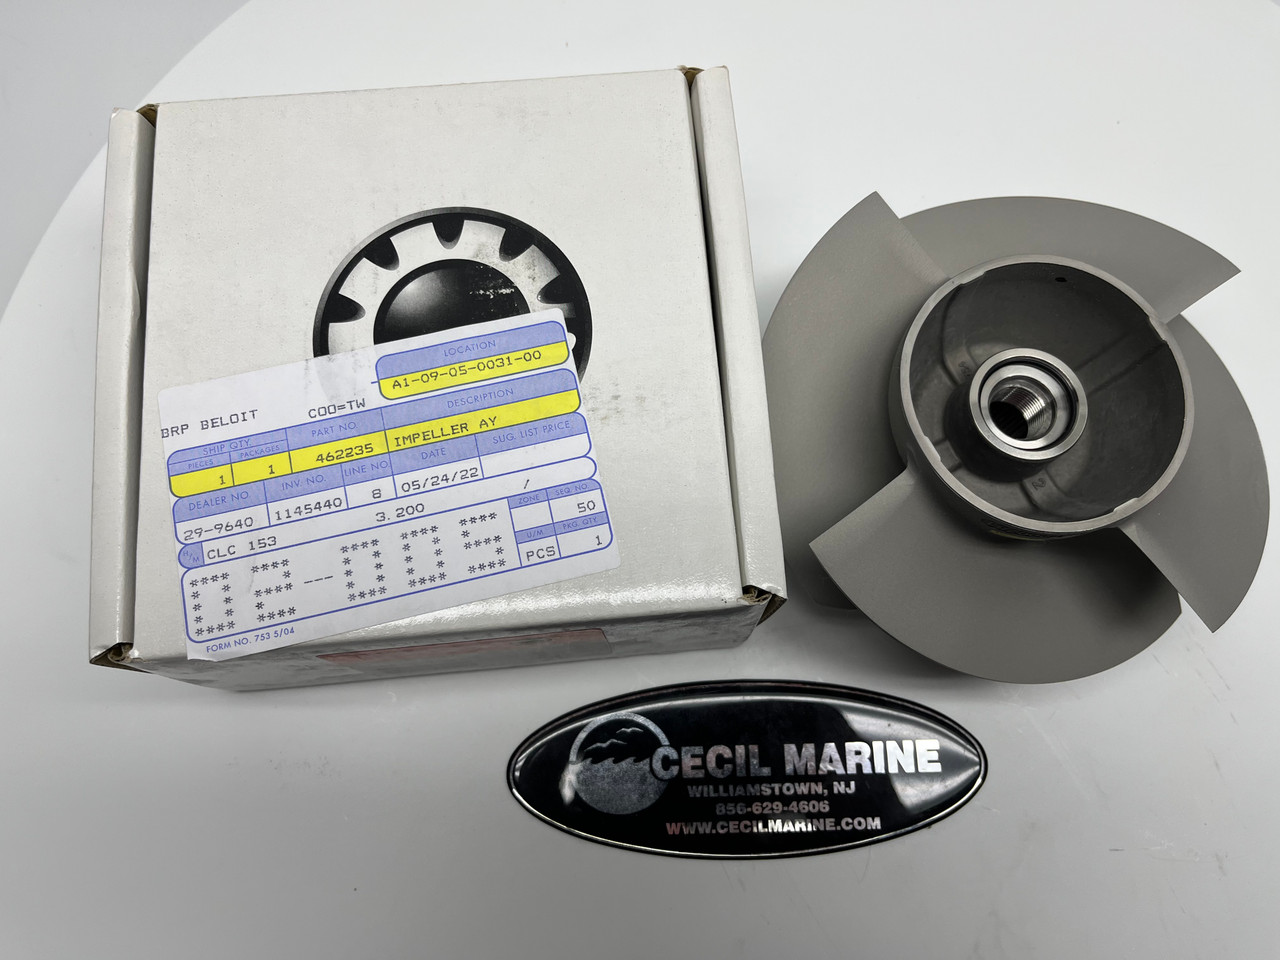 $399.99* GENUINE BRP no tax* IMPELLER 200 HP. 21 TO 23FT. & 24 TO 25 FT. 0462235 (BRP's old part # was 461139) *In Stock & Ready To Ship!